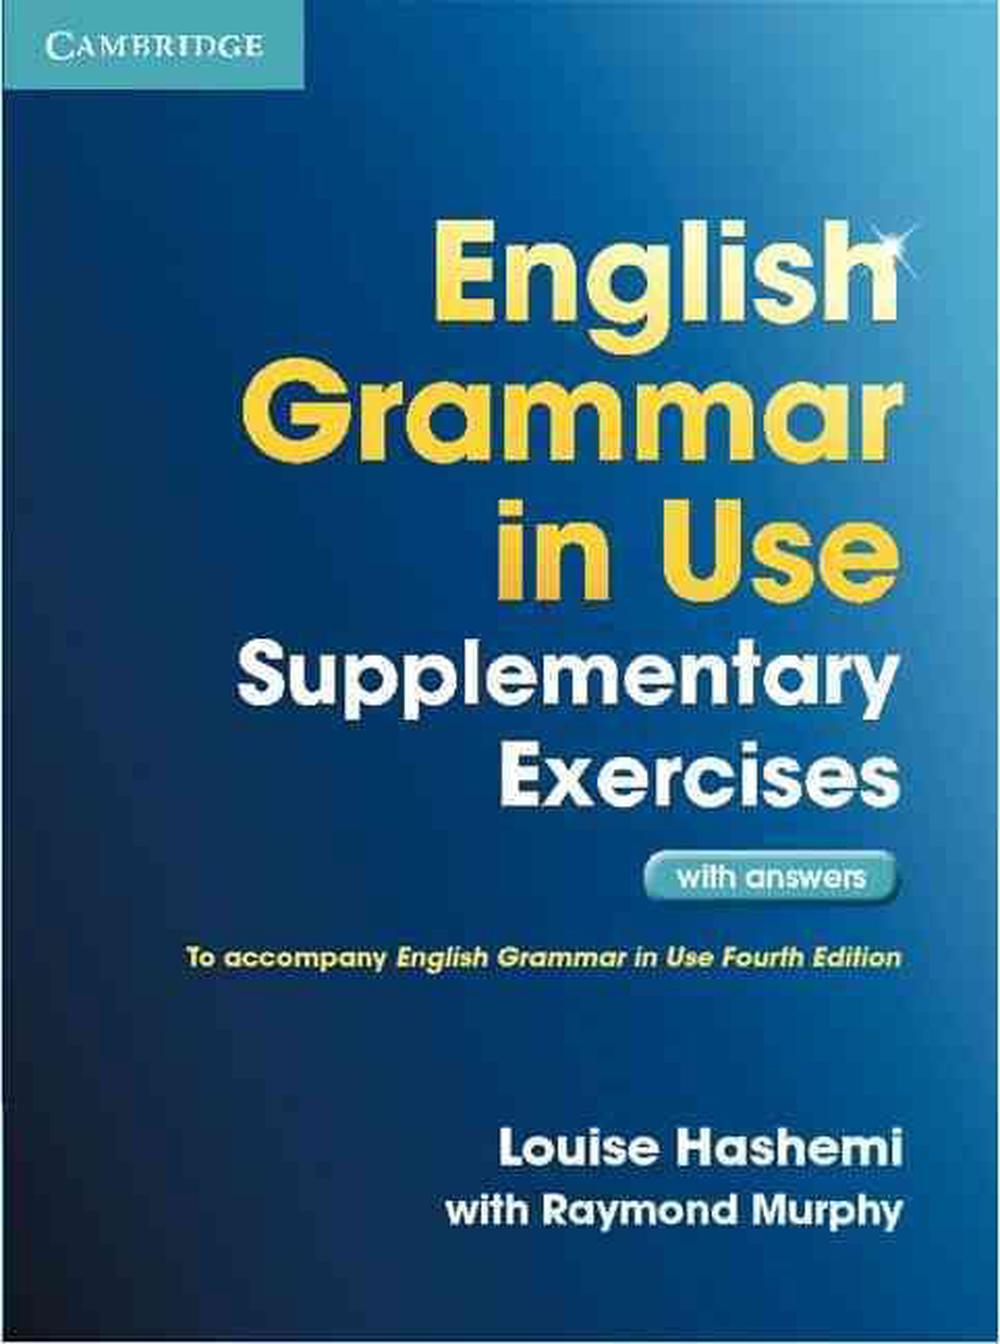 english grammar in use supplementary exercises 4th edition pdf